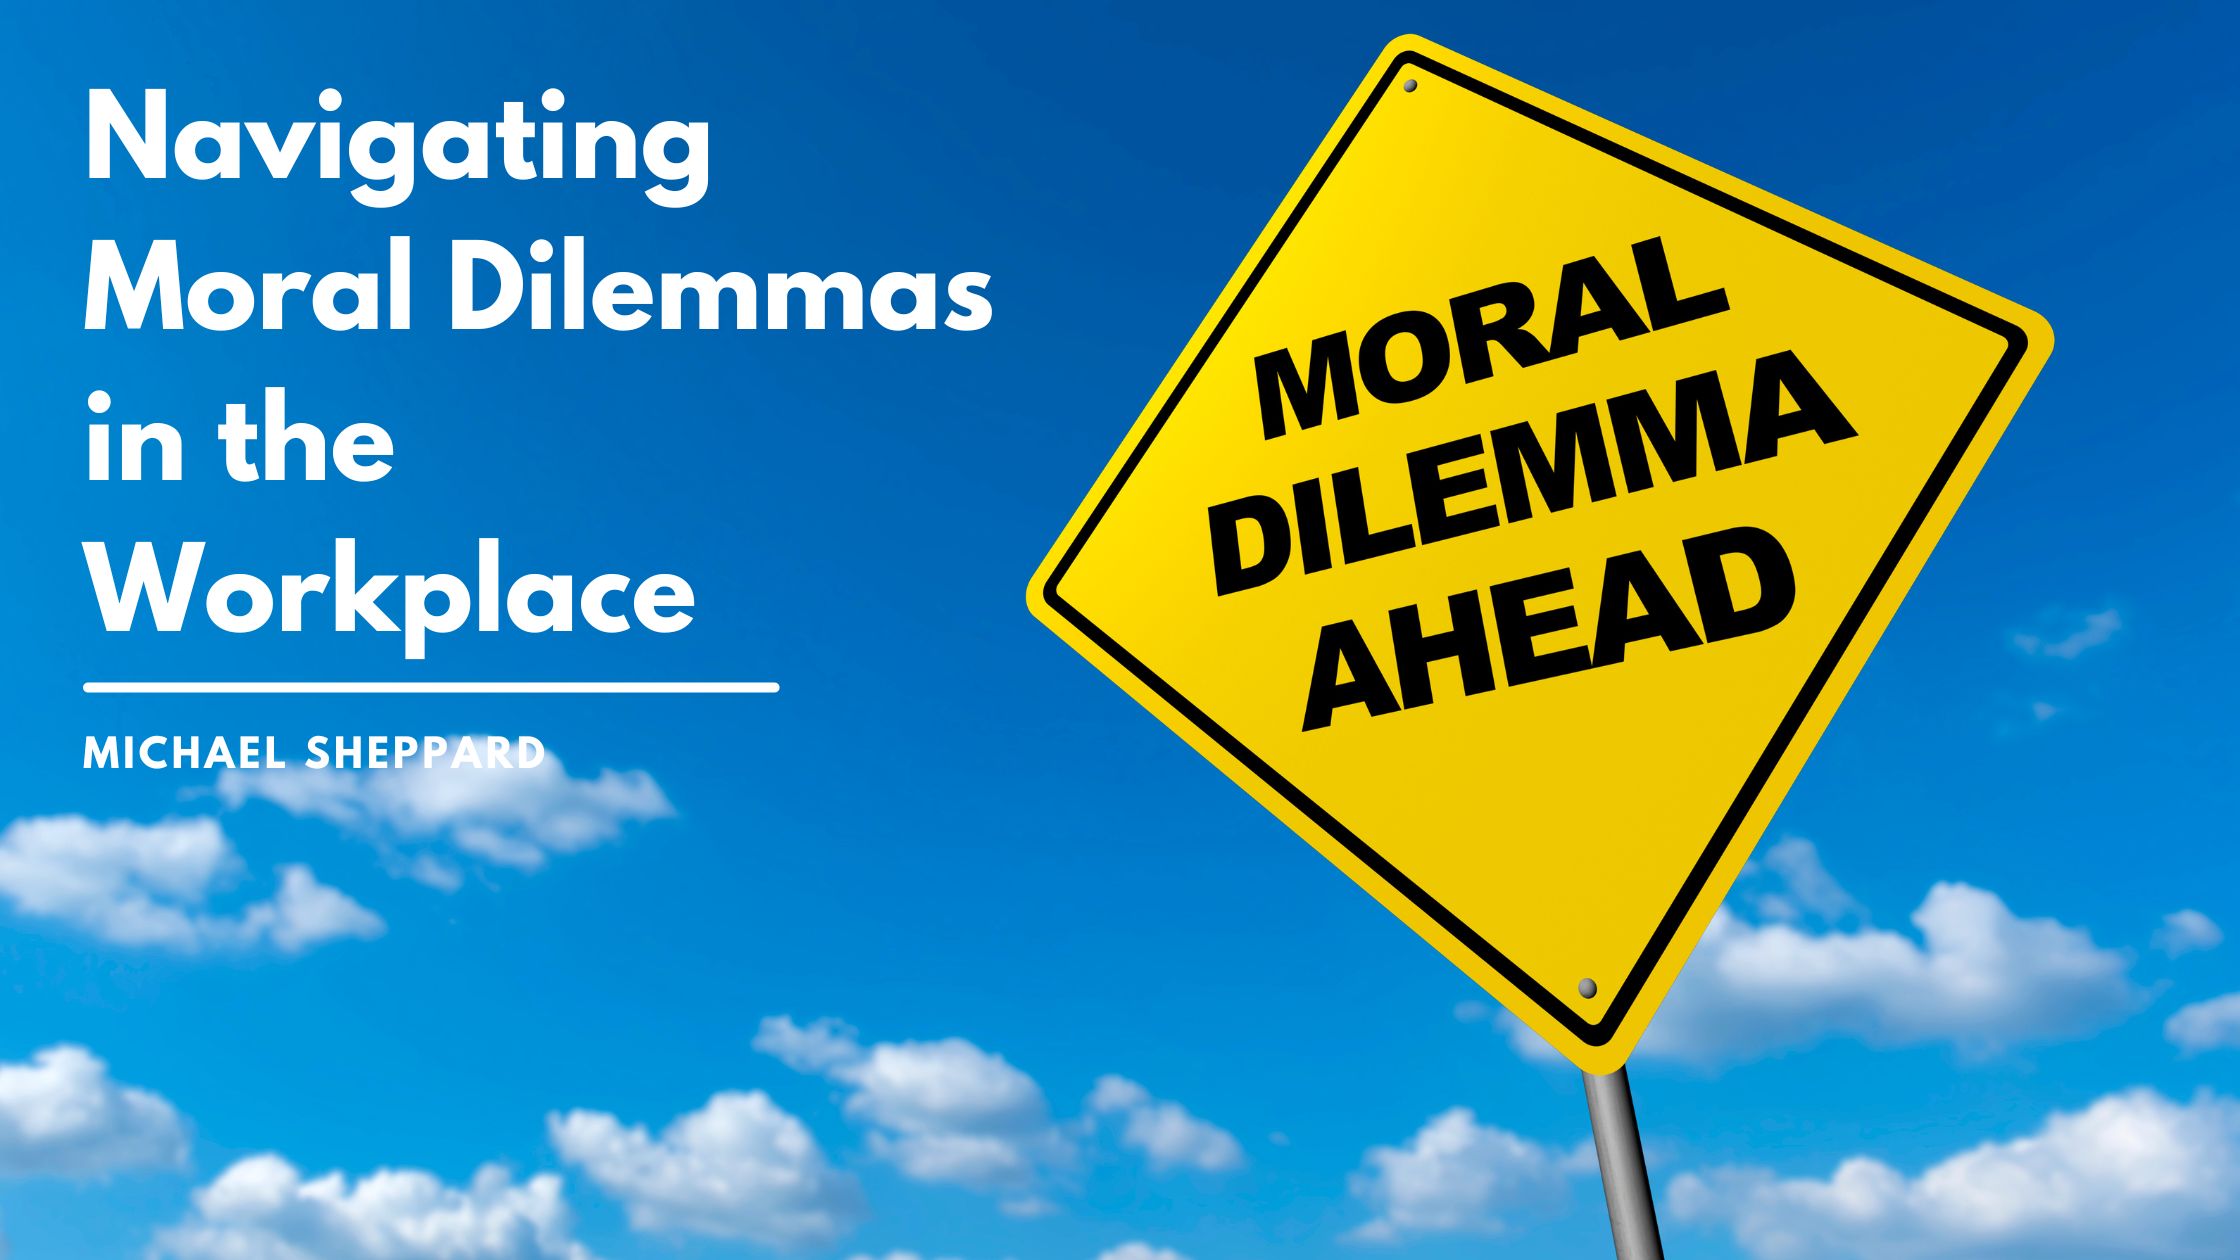 Navigating Moral Dilemmas in the Workplace